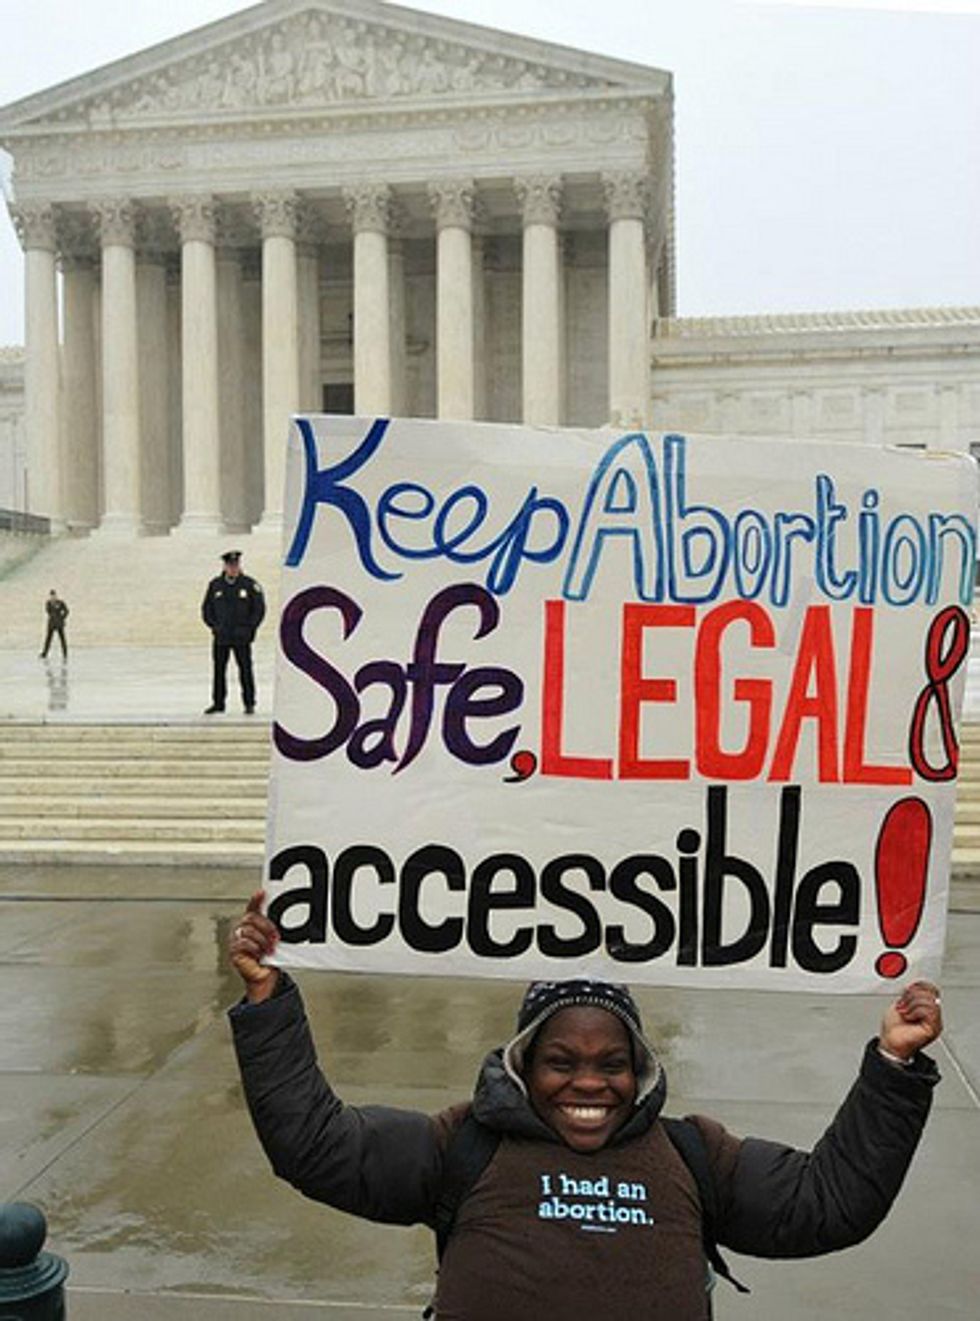 Missouri Triples Waiting Period For Abortion As Both Sides Of Fight React